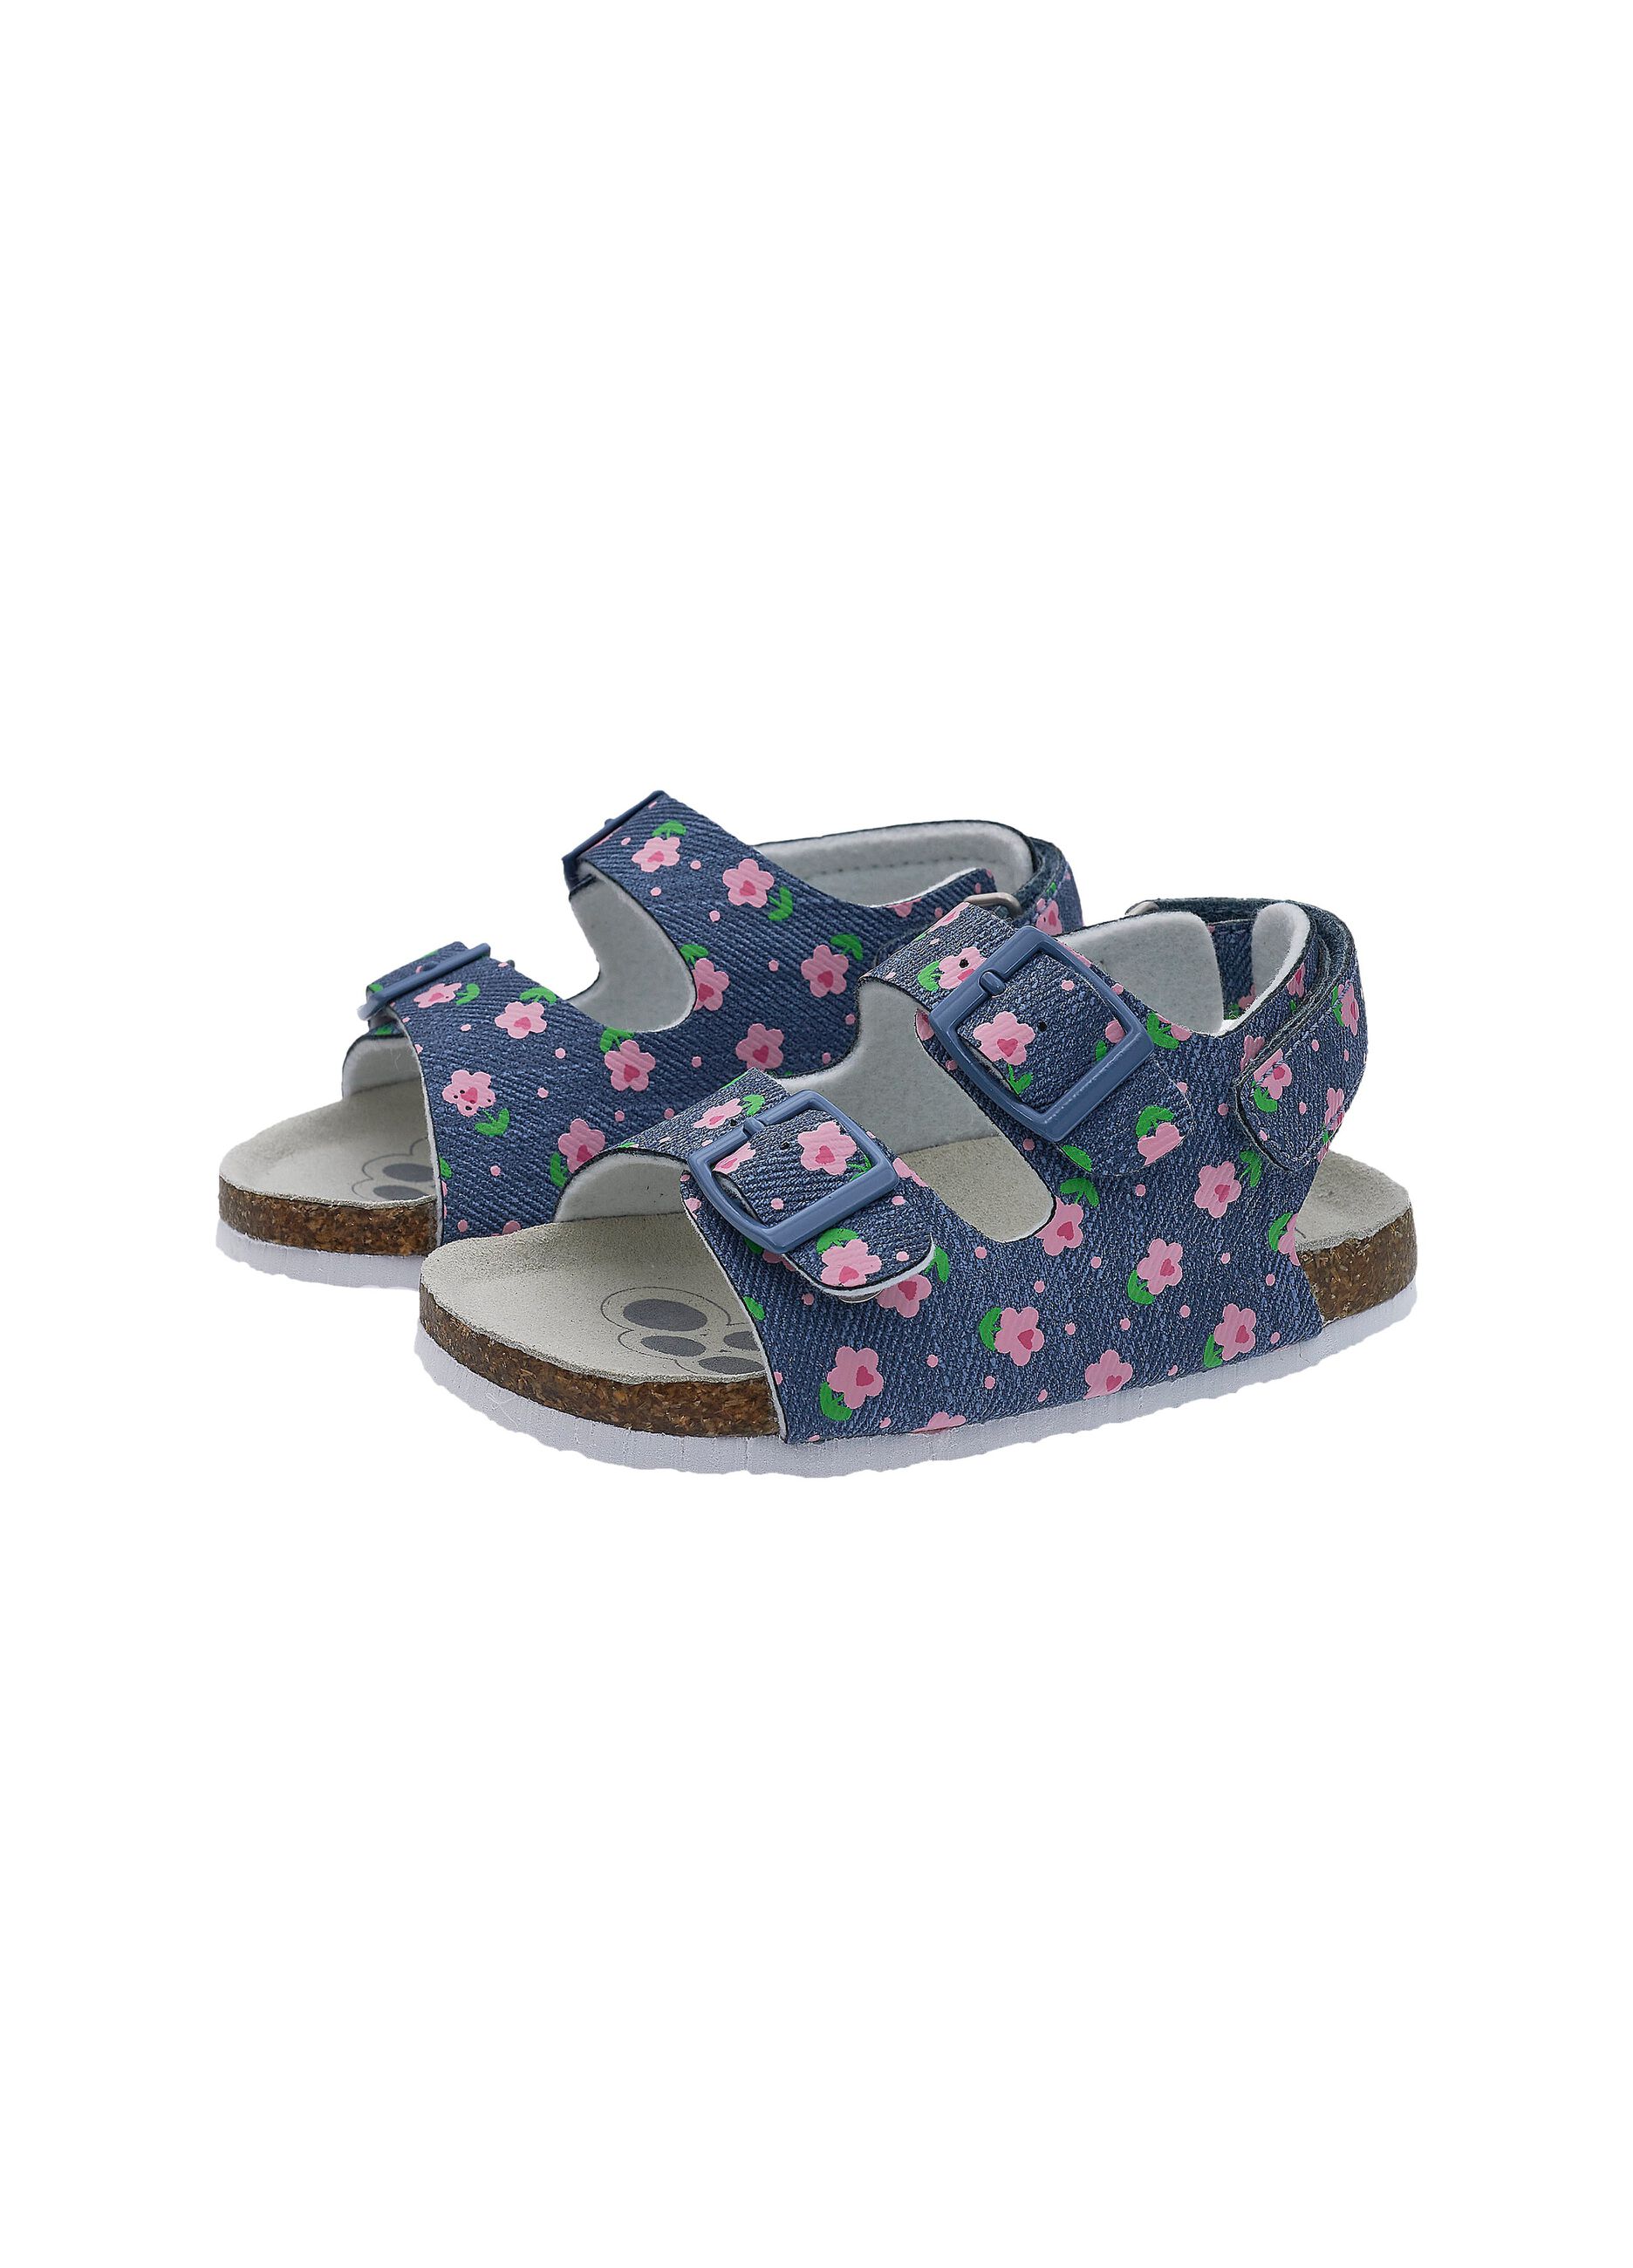 Flosty sandals with flowers print